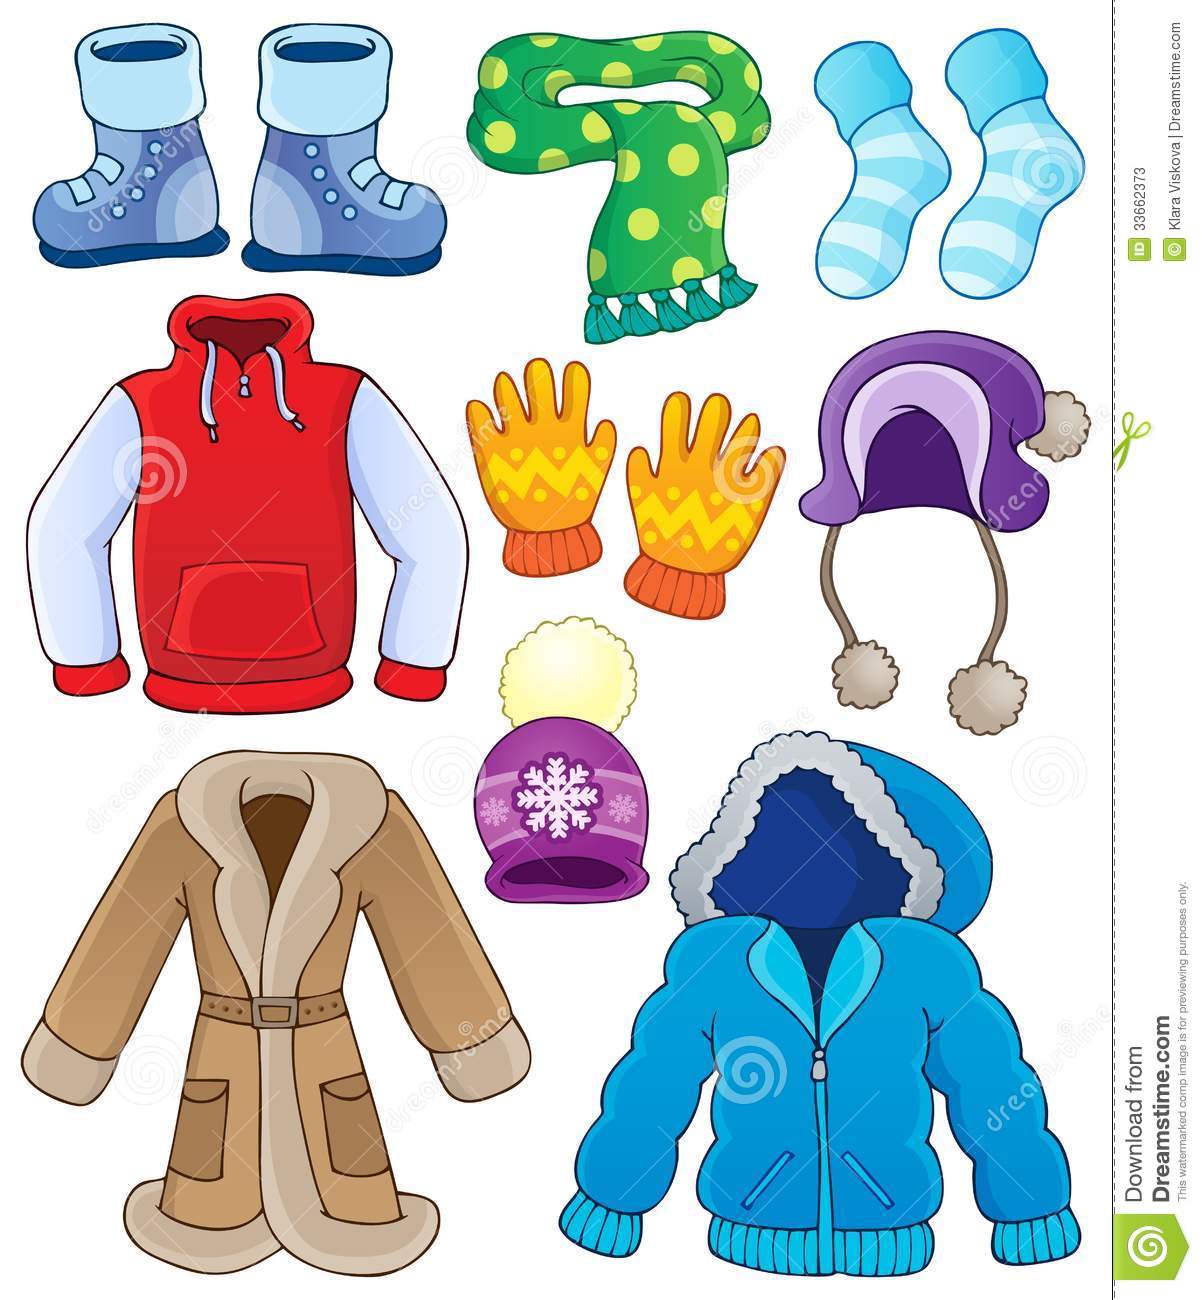 887 Winter Clothes free clipart.